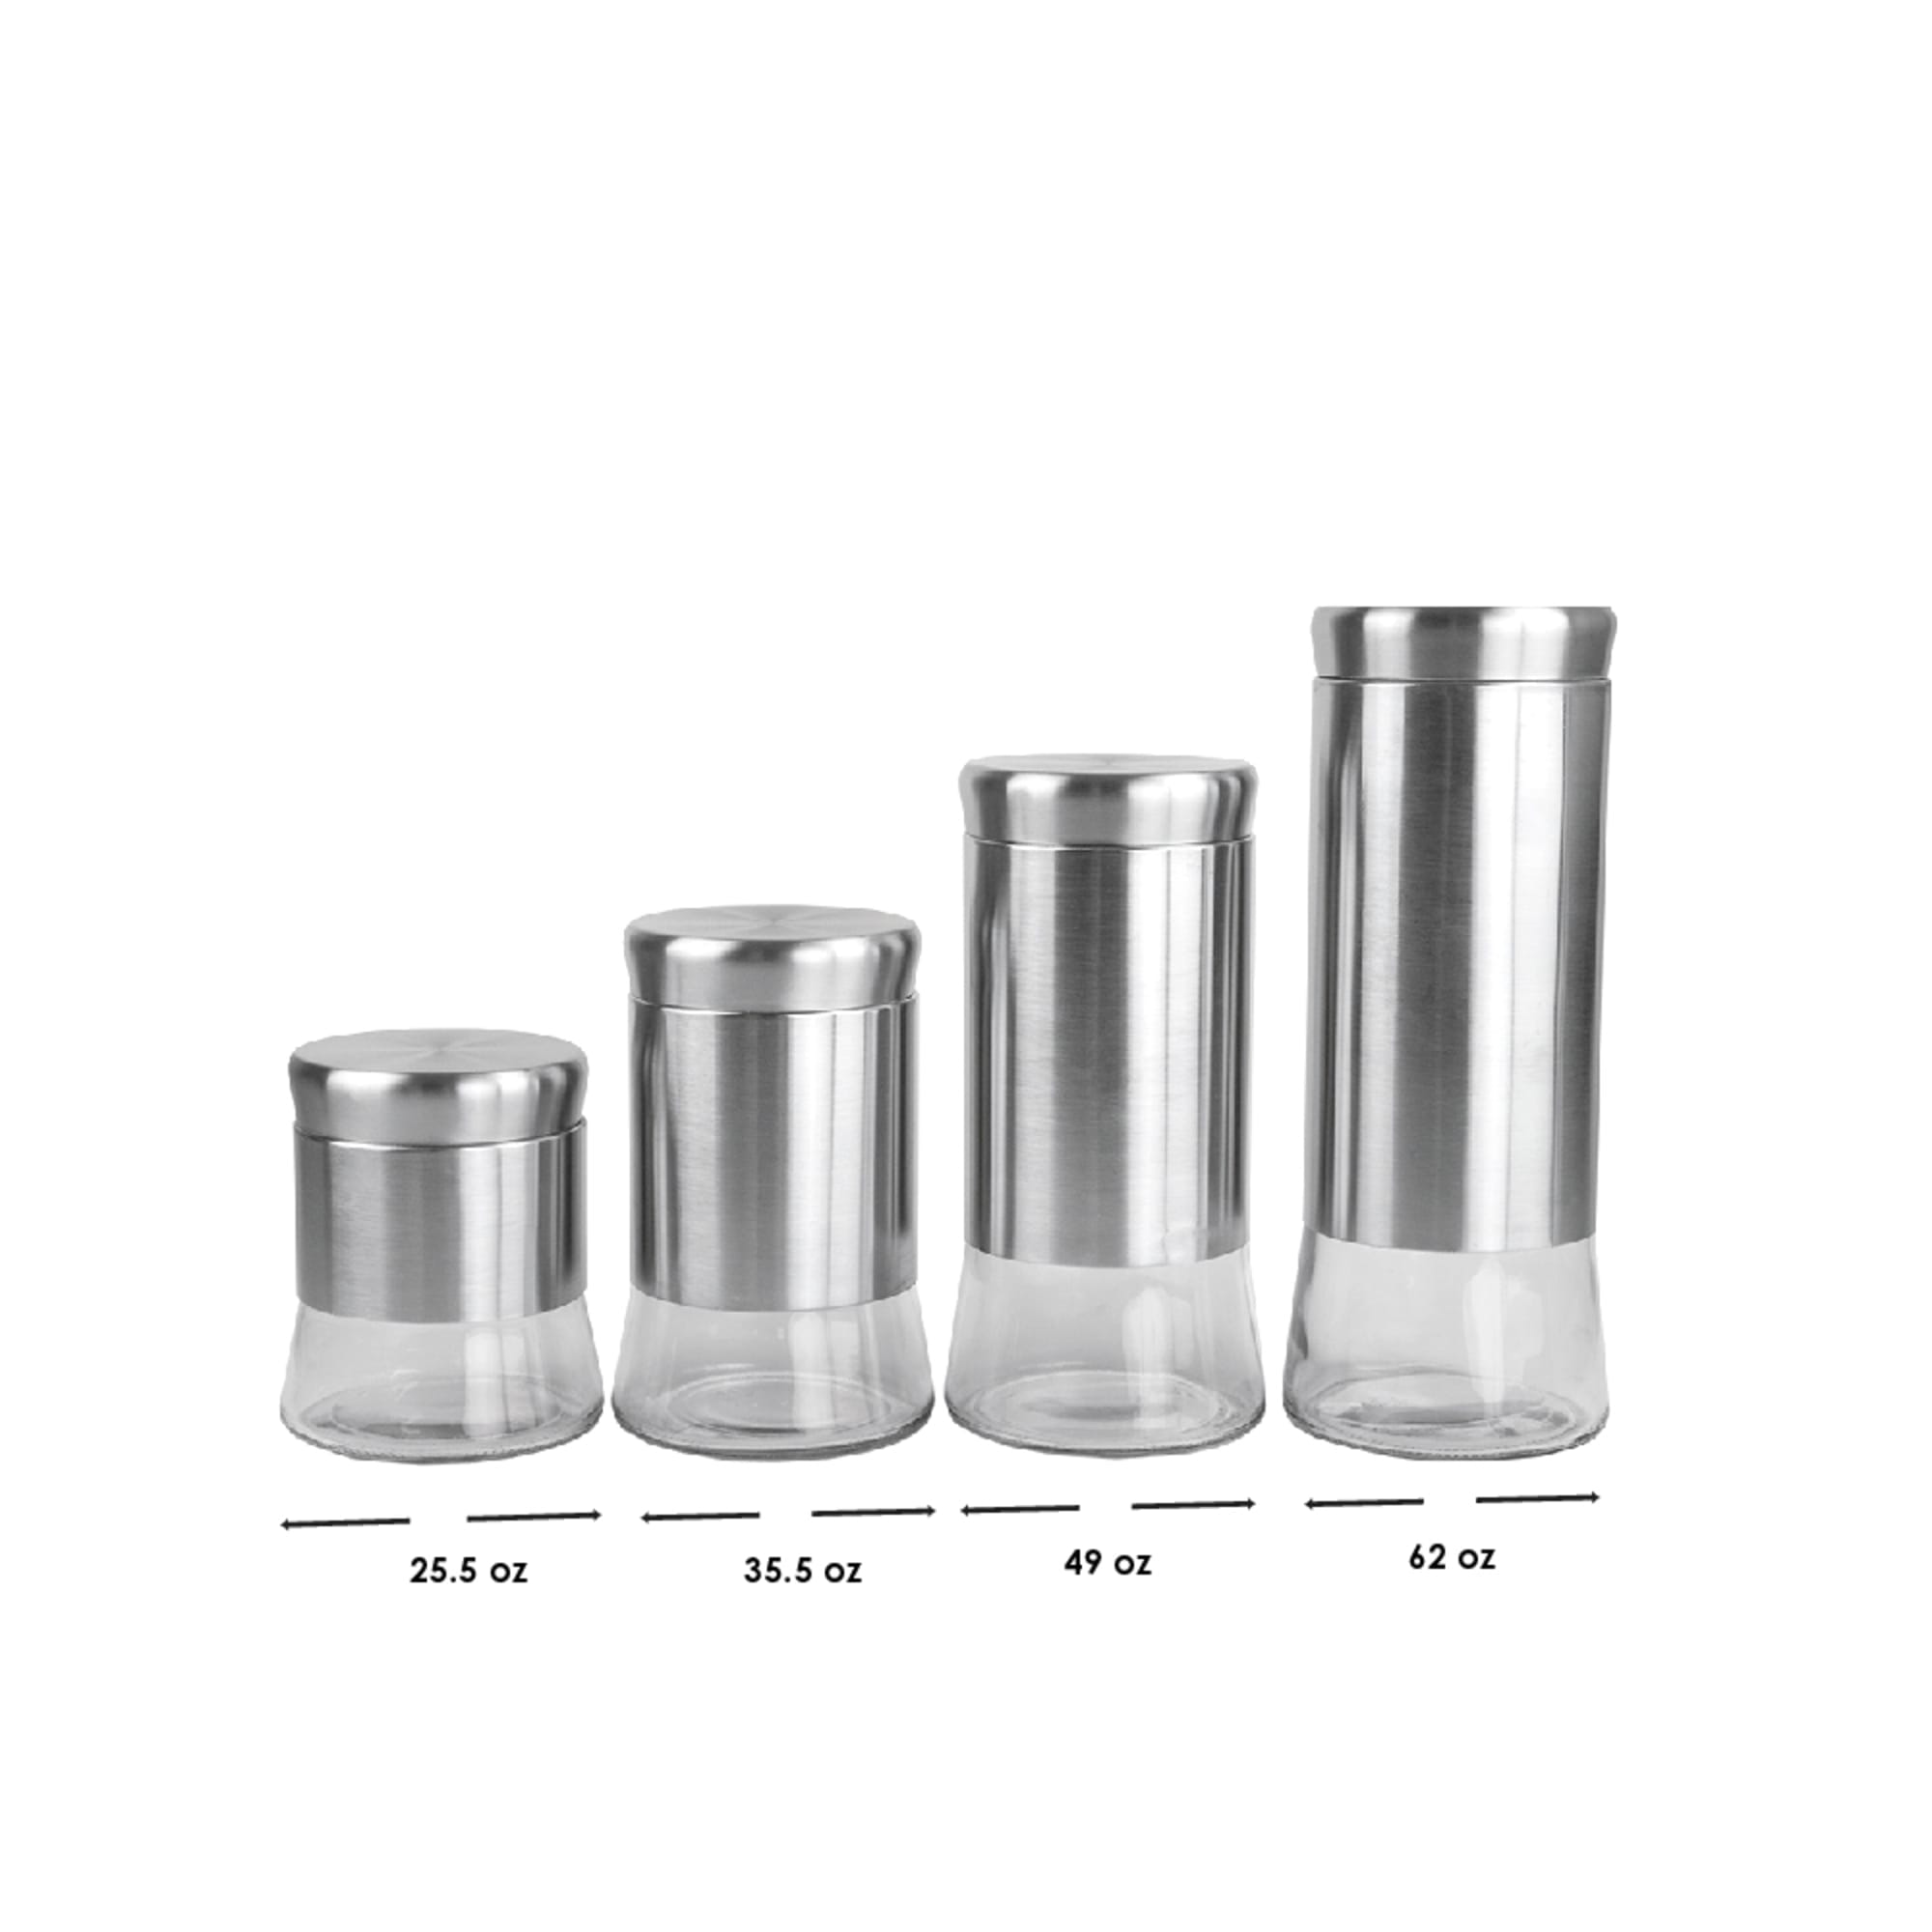 Michael Graves Design Essence 4 Piece Stainless Steel Canister Set with Clear Glass Bottom, Silver $15.00 EACH, CASE PACK OF 4